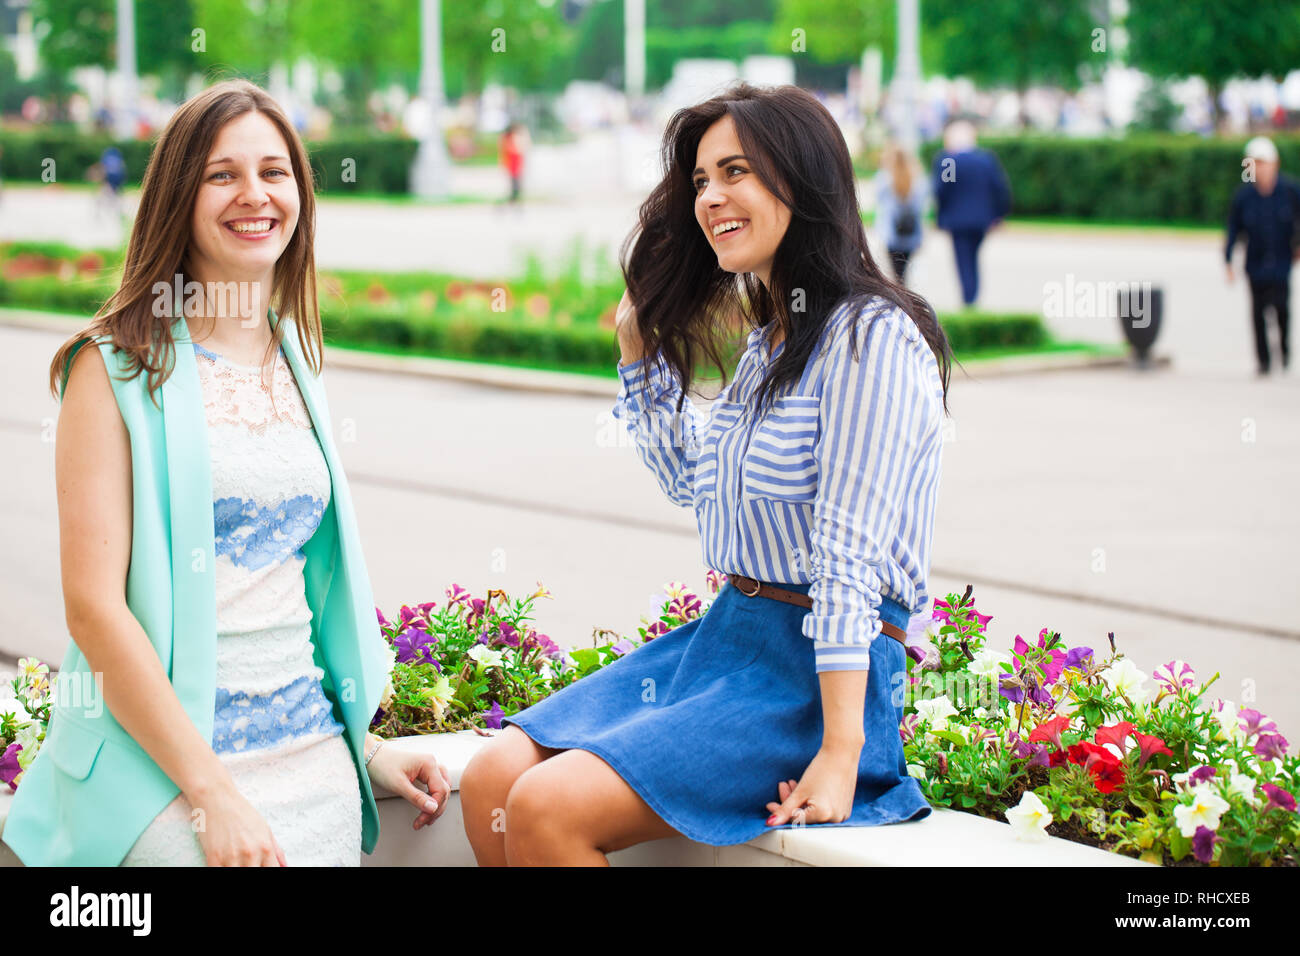 Two young women talking to each other. Girl friends having a chat. Stock Photo